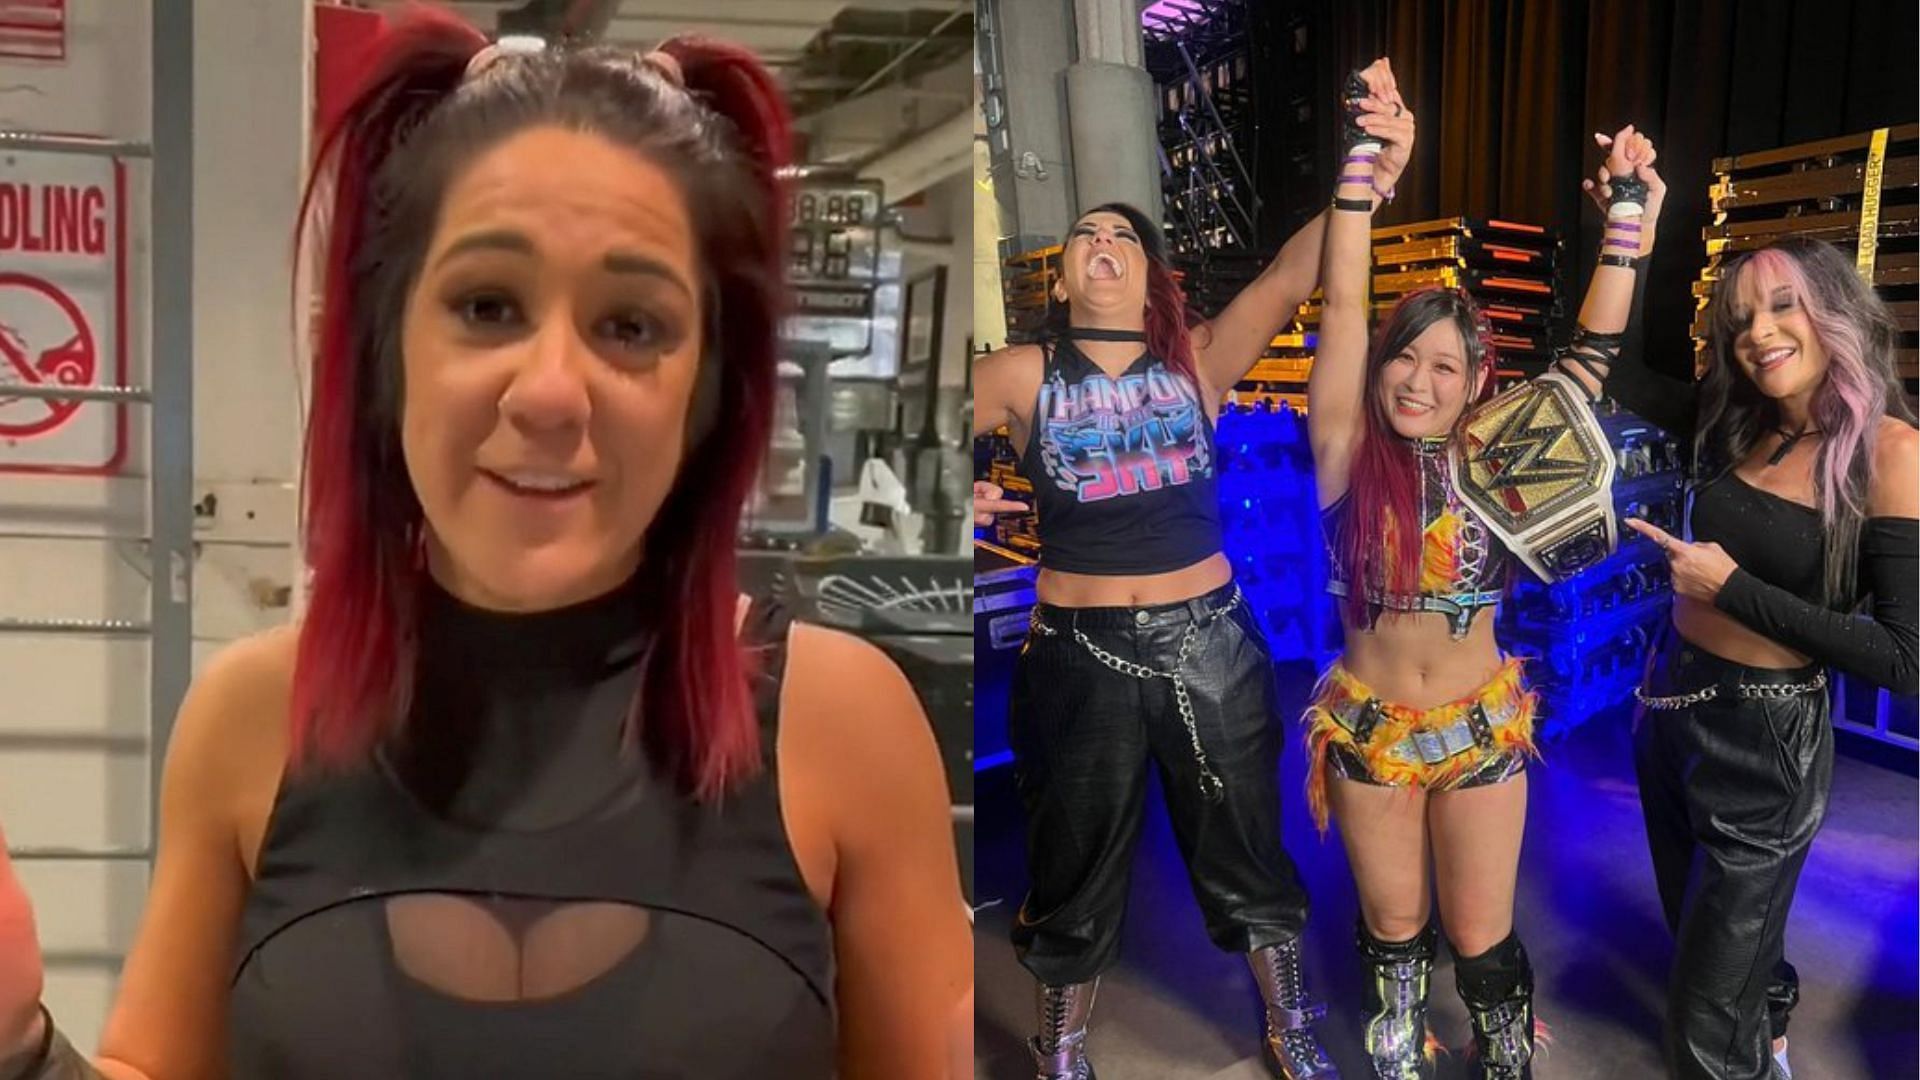 Bayley played a major role in IYO SKY